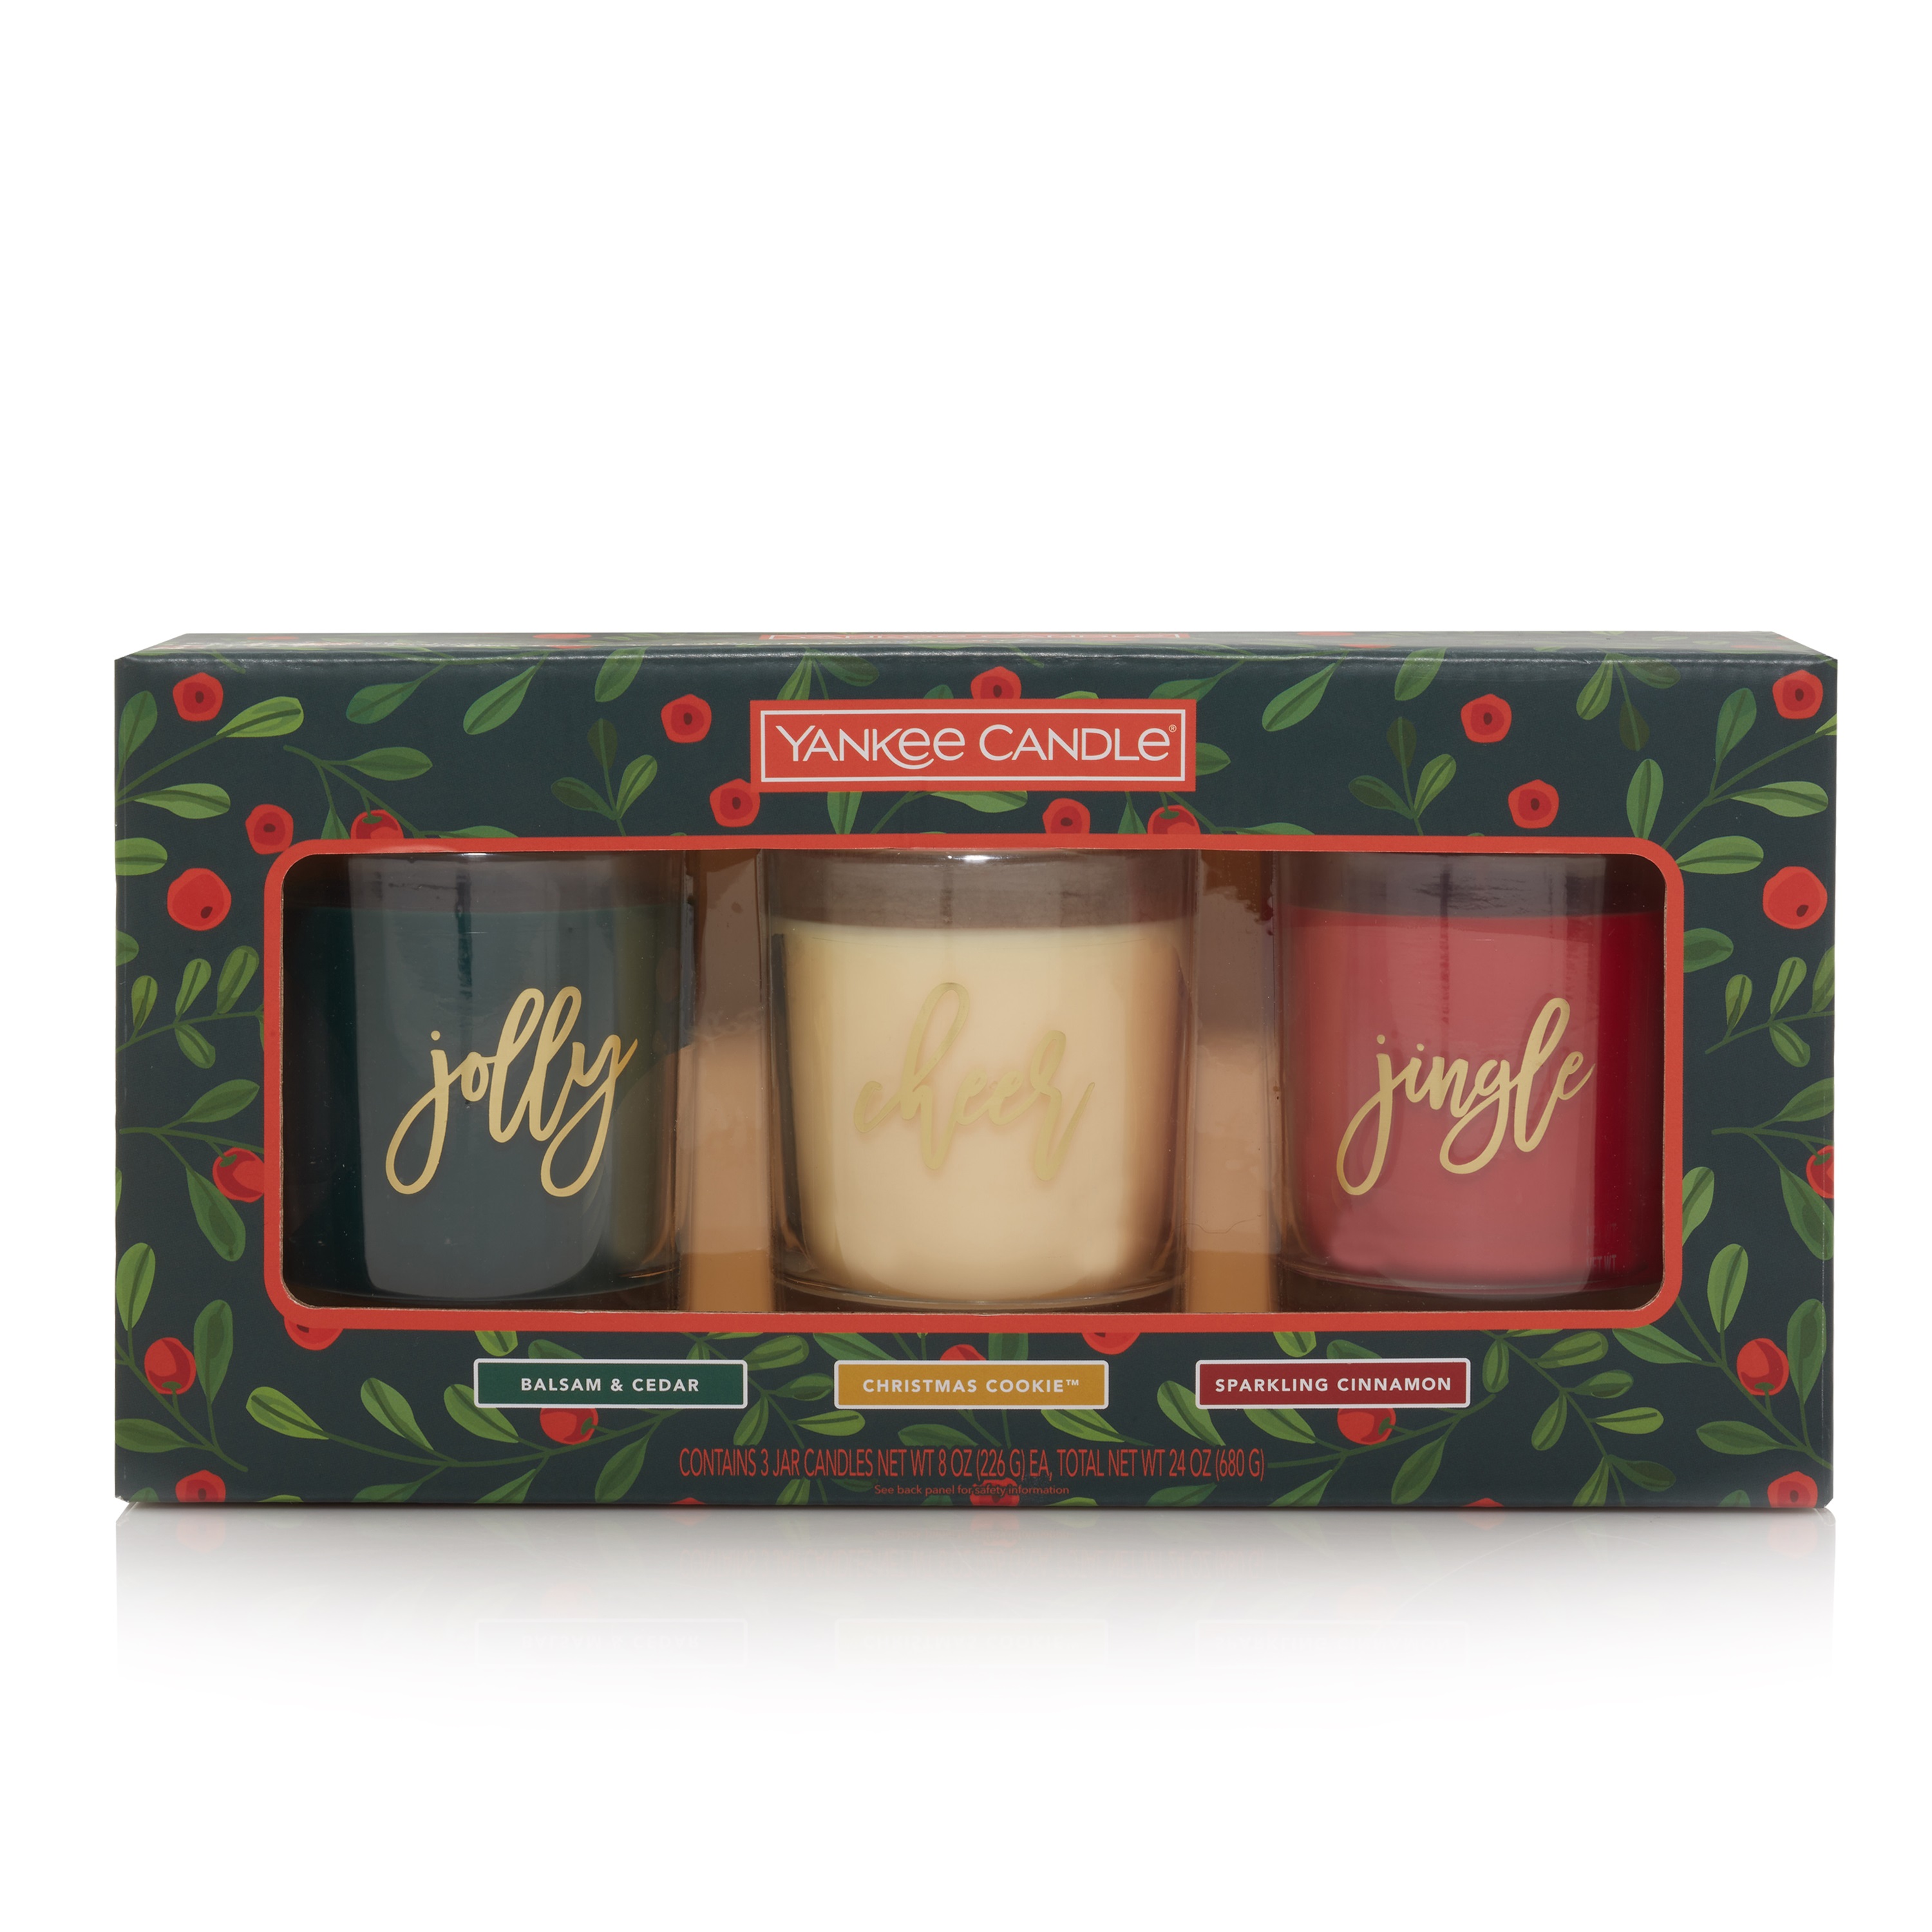 Yankee Candle 3-Pack Holiday Gift Set - image 1 of 8